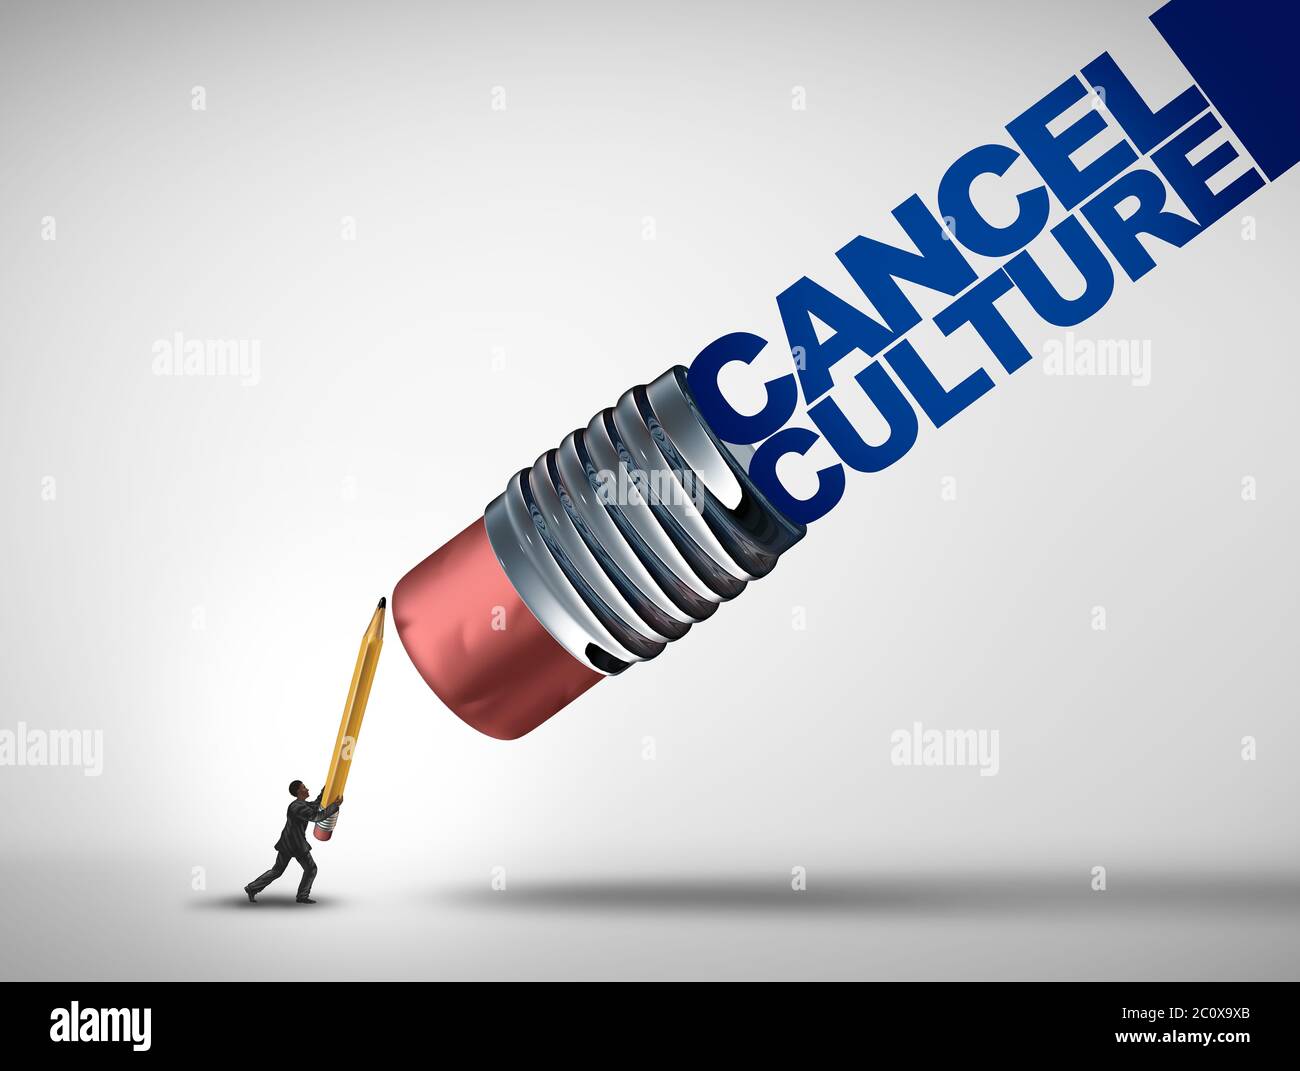 Cancel Culture or cultural cancellation and social media censorship as canceling or restricting opinions that are offensive or controversial. Stock Photo